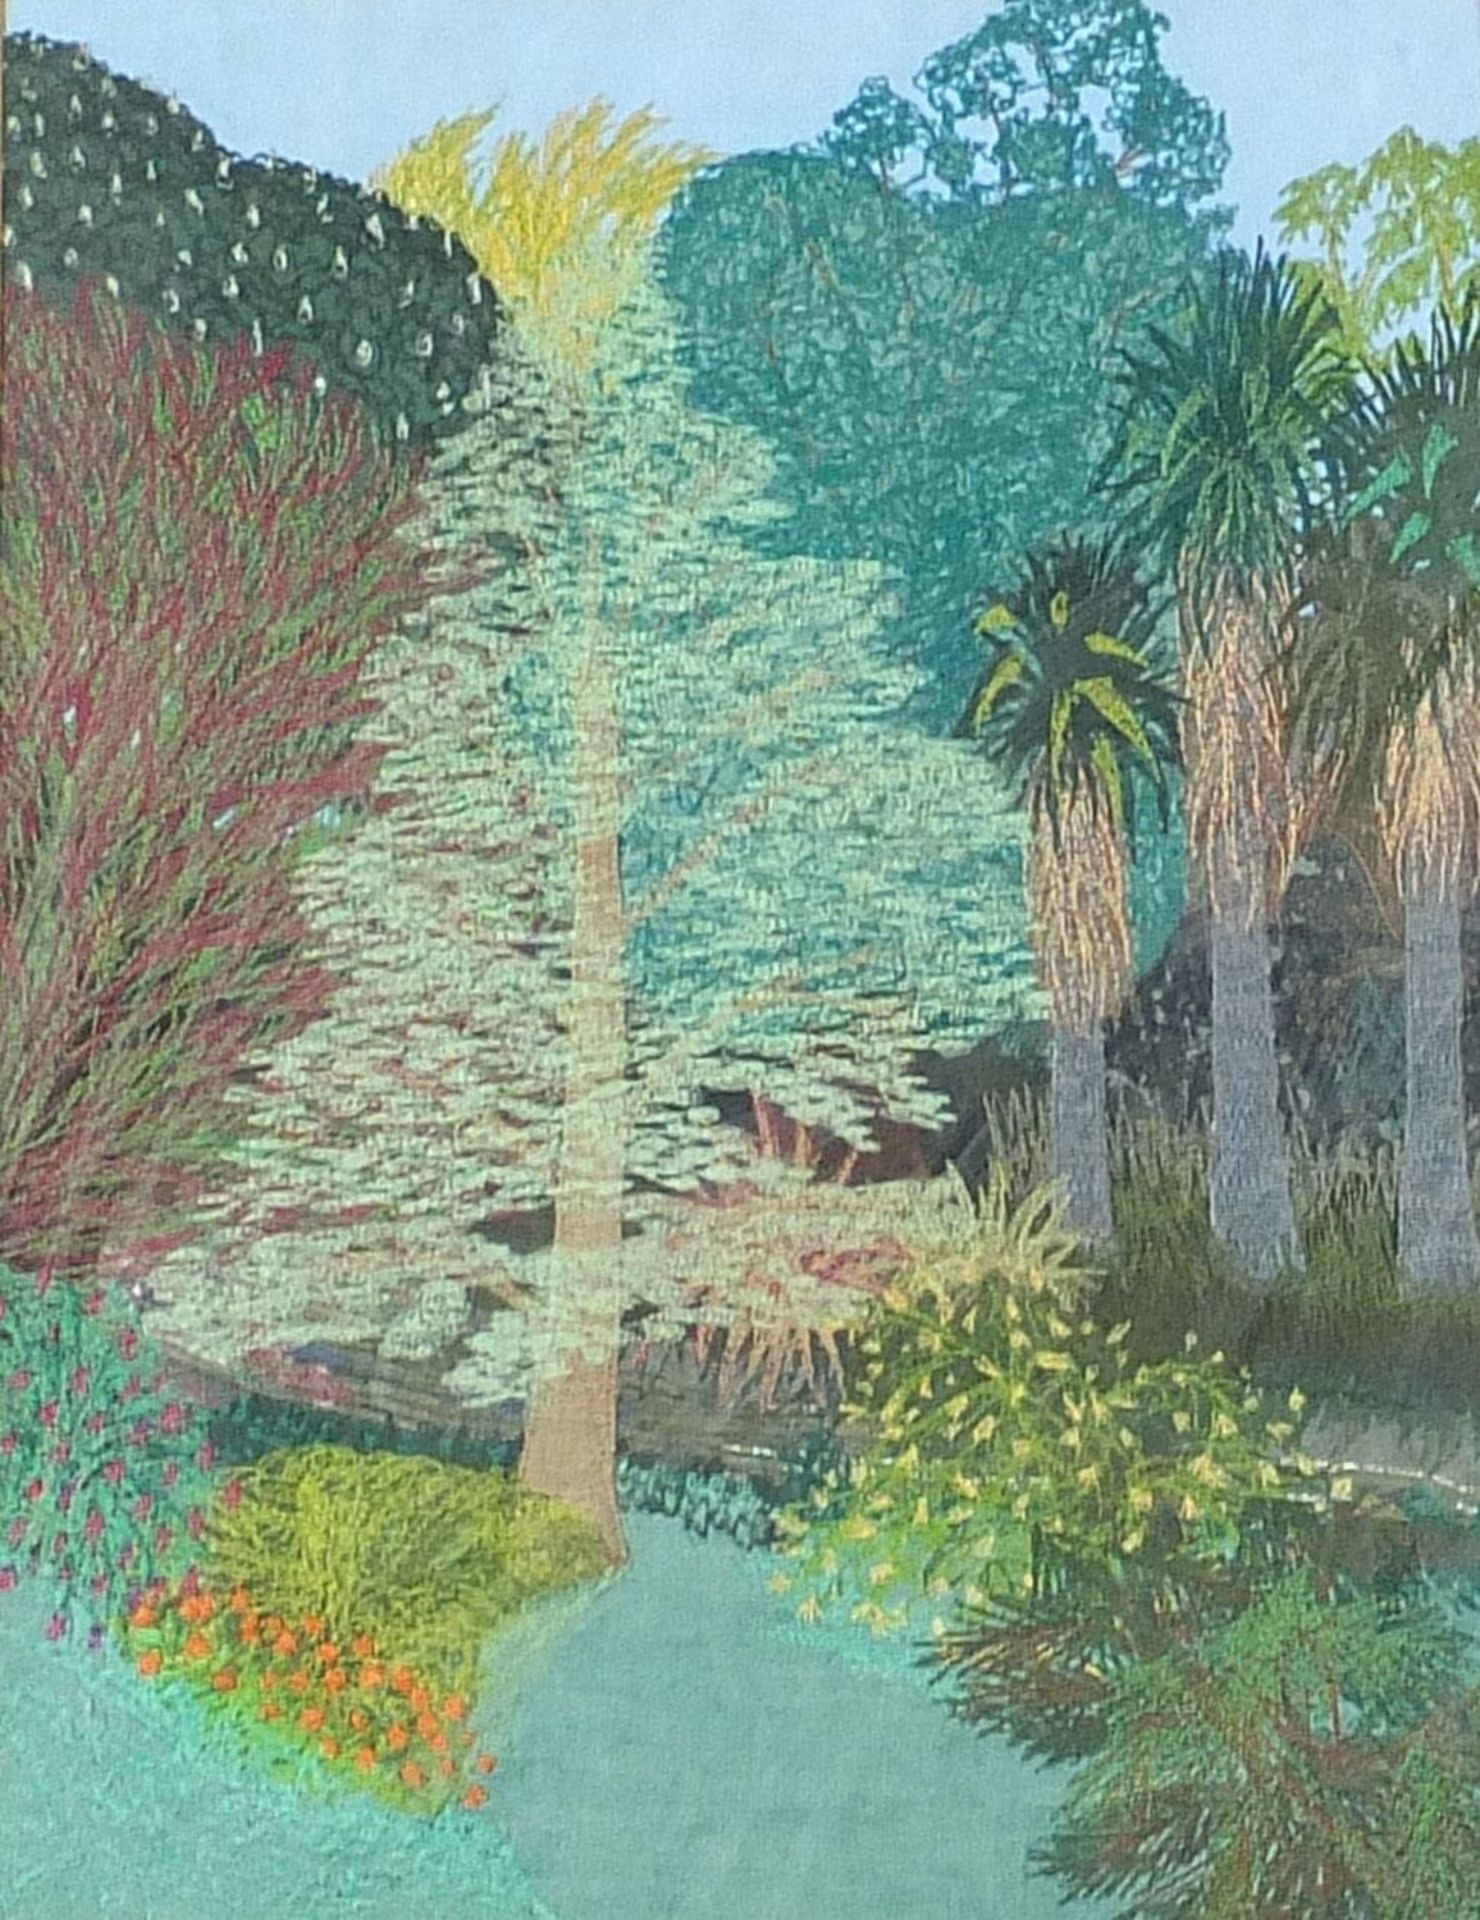 Gillian Wills - Cordyline Australis in a New Zealand garden, machine stitched embroidery,